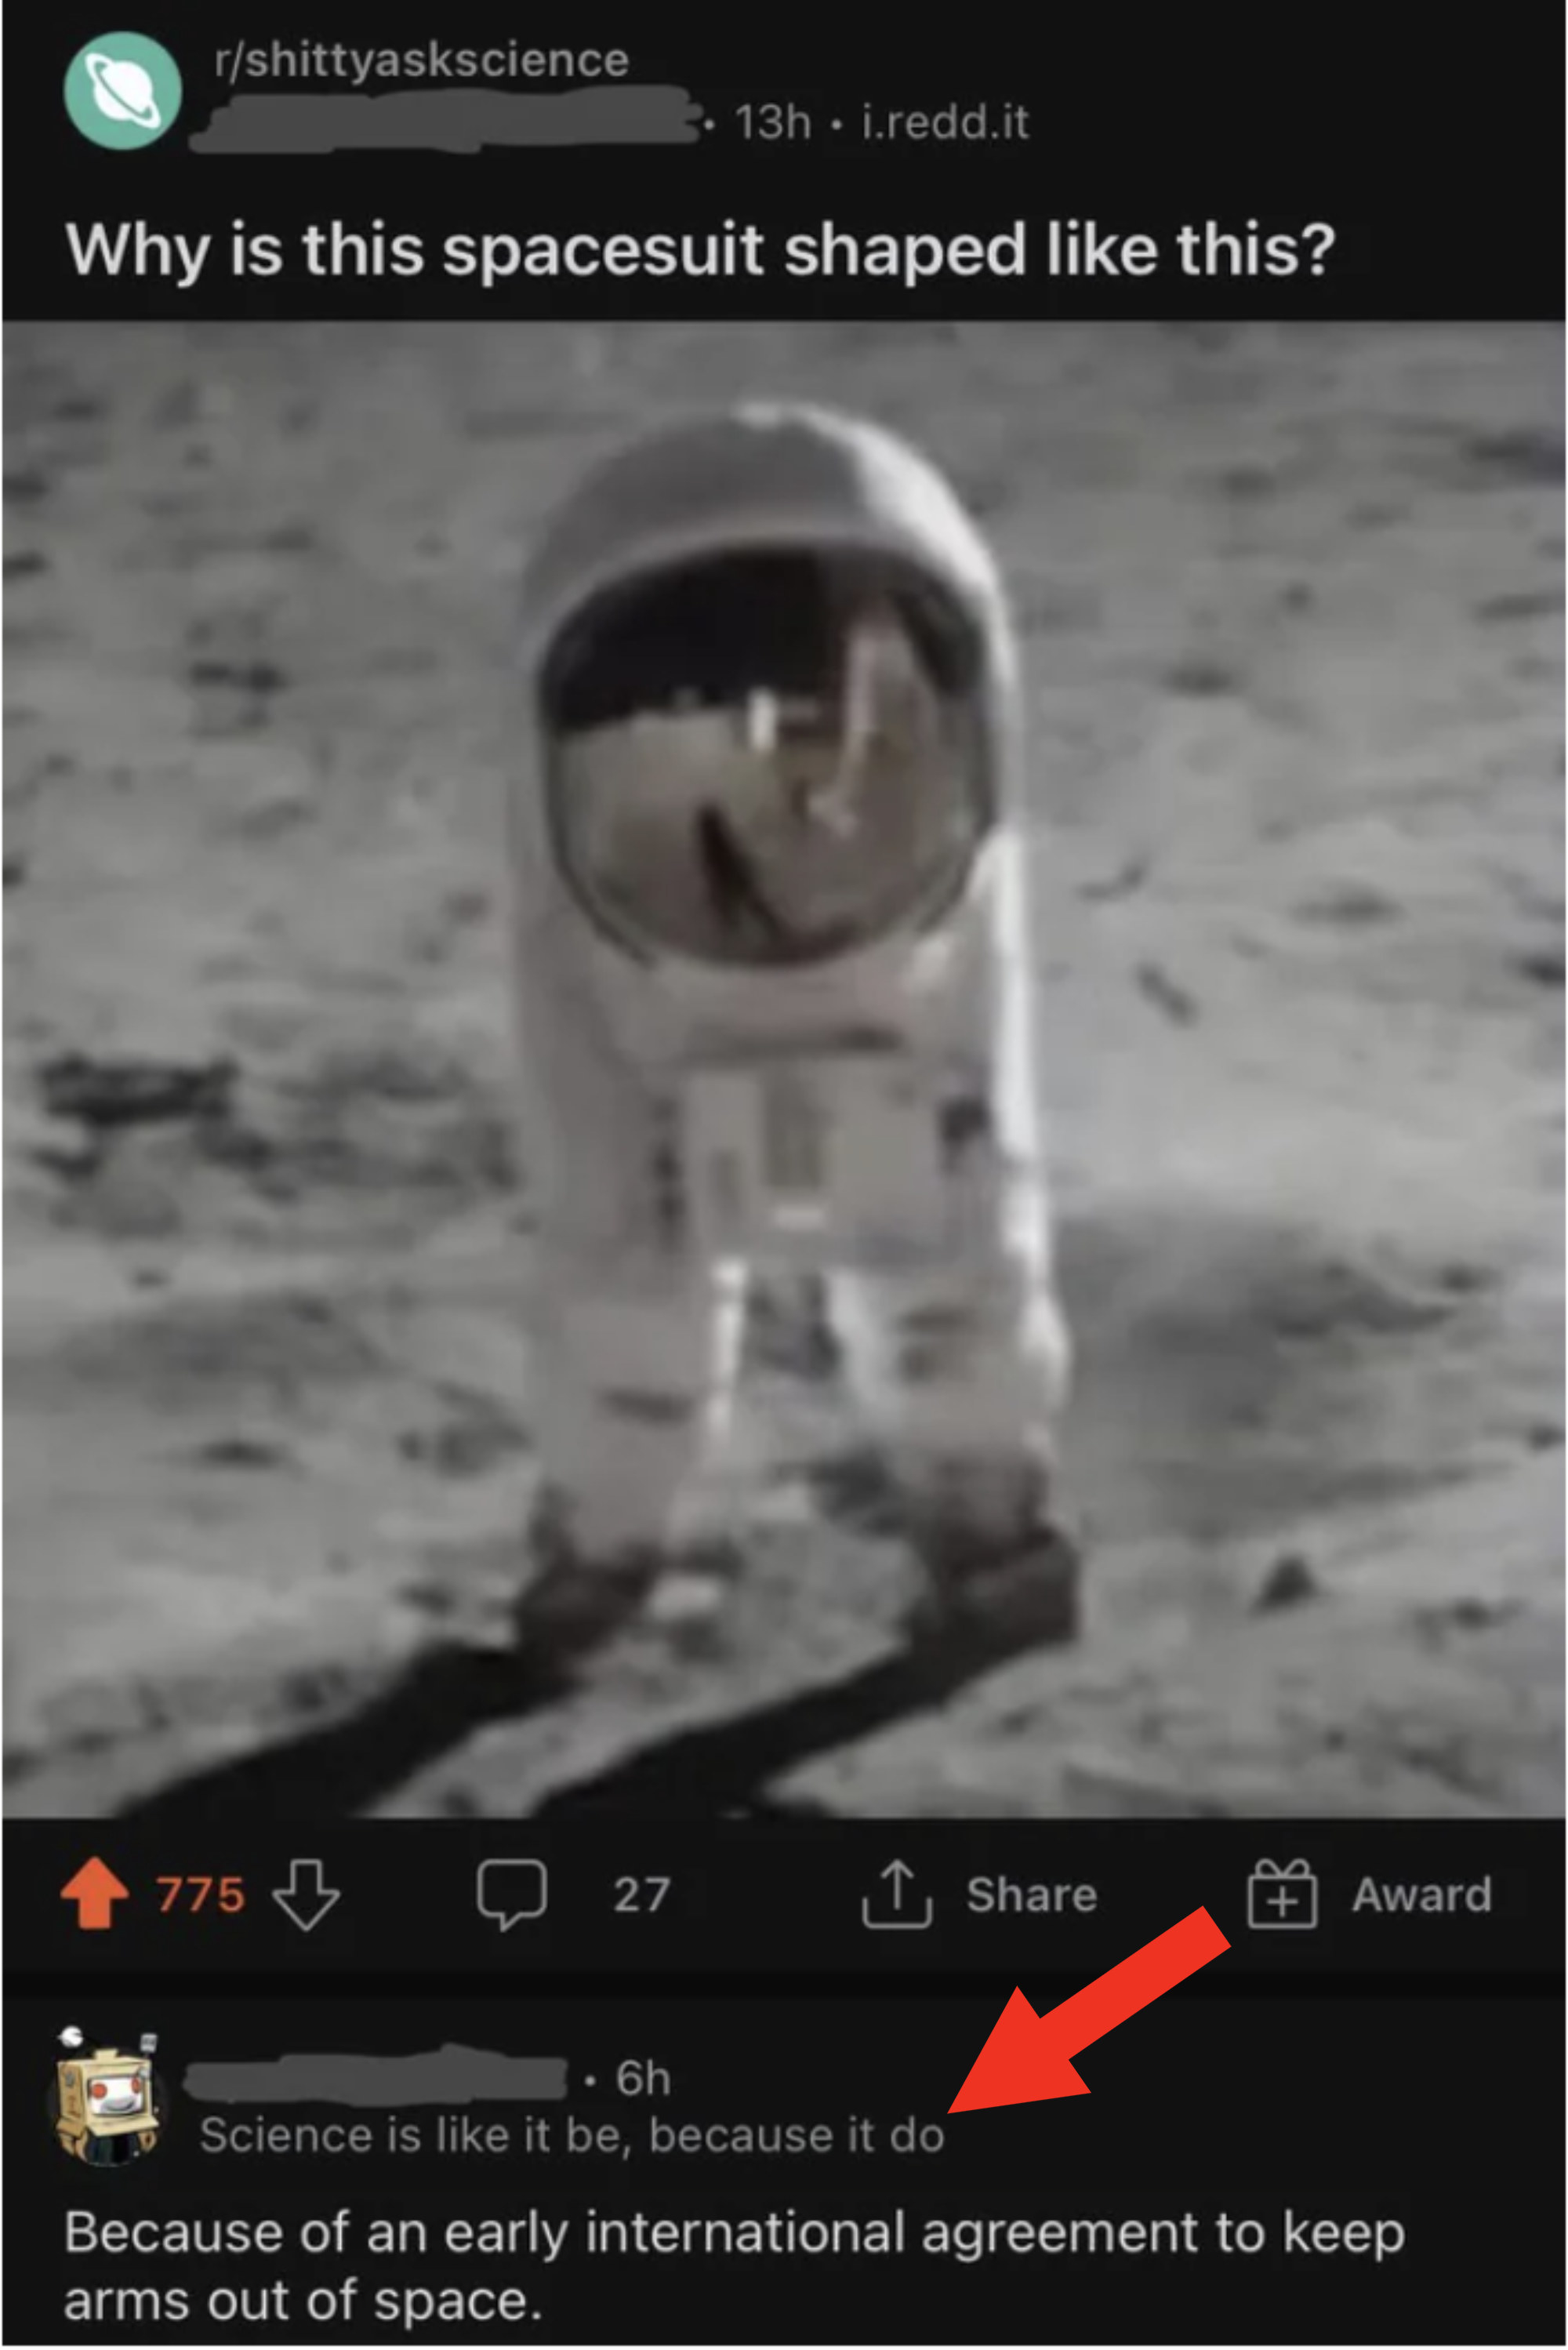 A picture of a photoshopped person on the moon makes their spacesuit look like there&#x27;s only legs and a head, and a commenter says there was an &quot;early international agreement to keep arms out of space&quot;